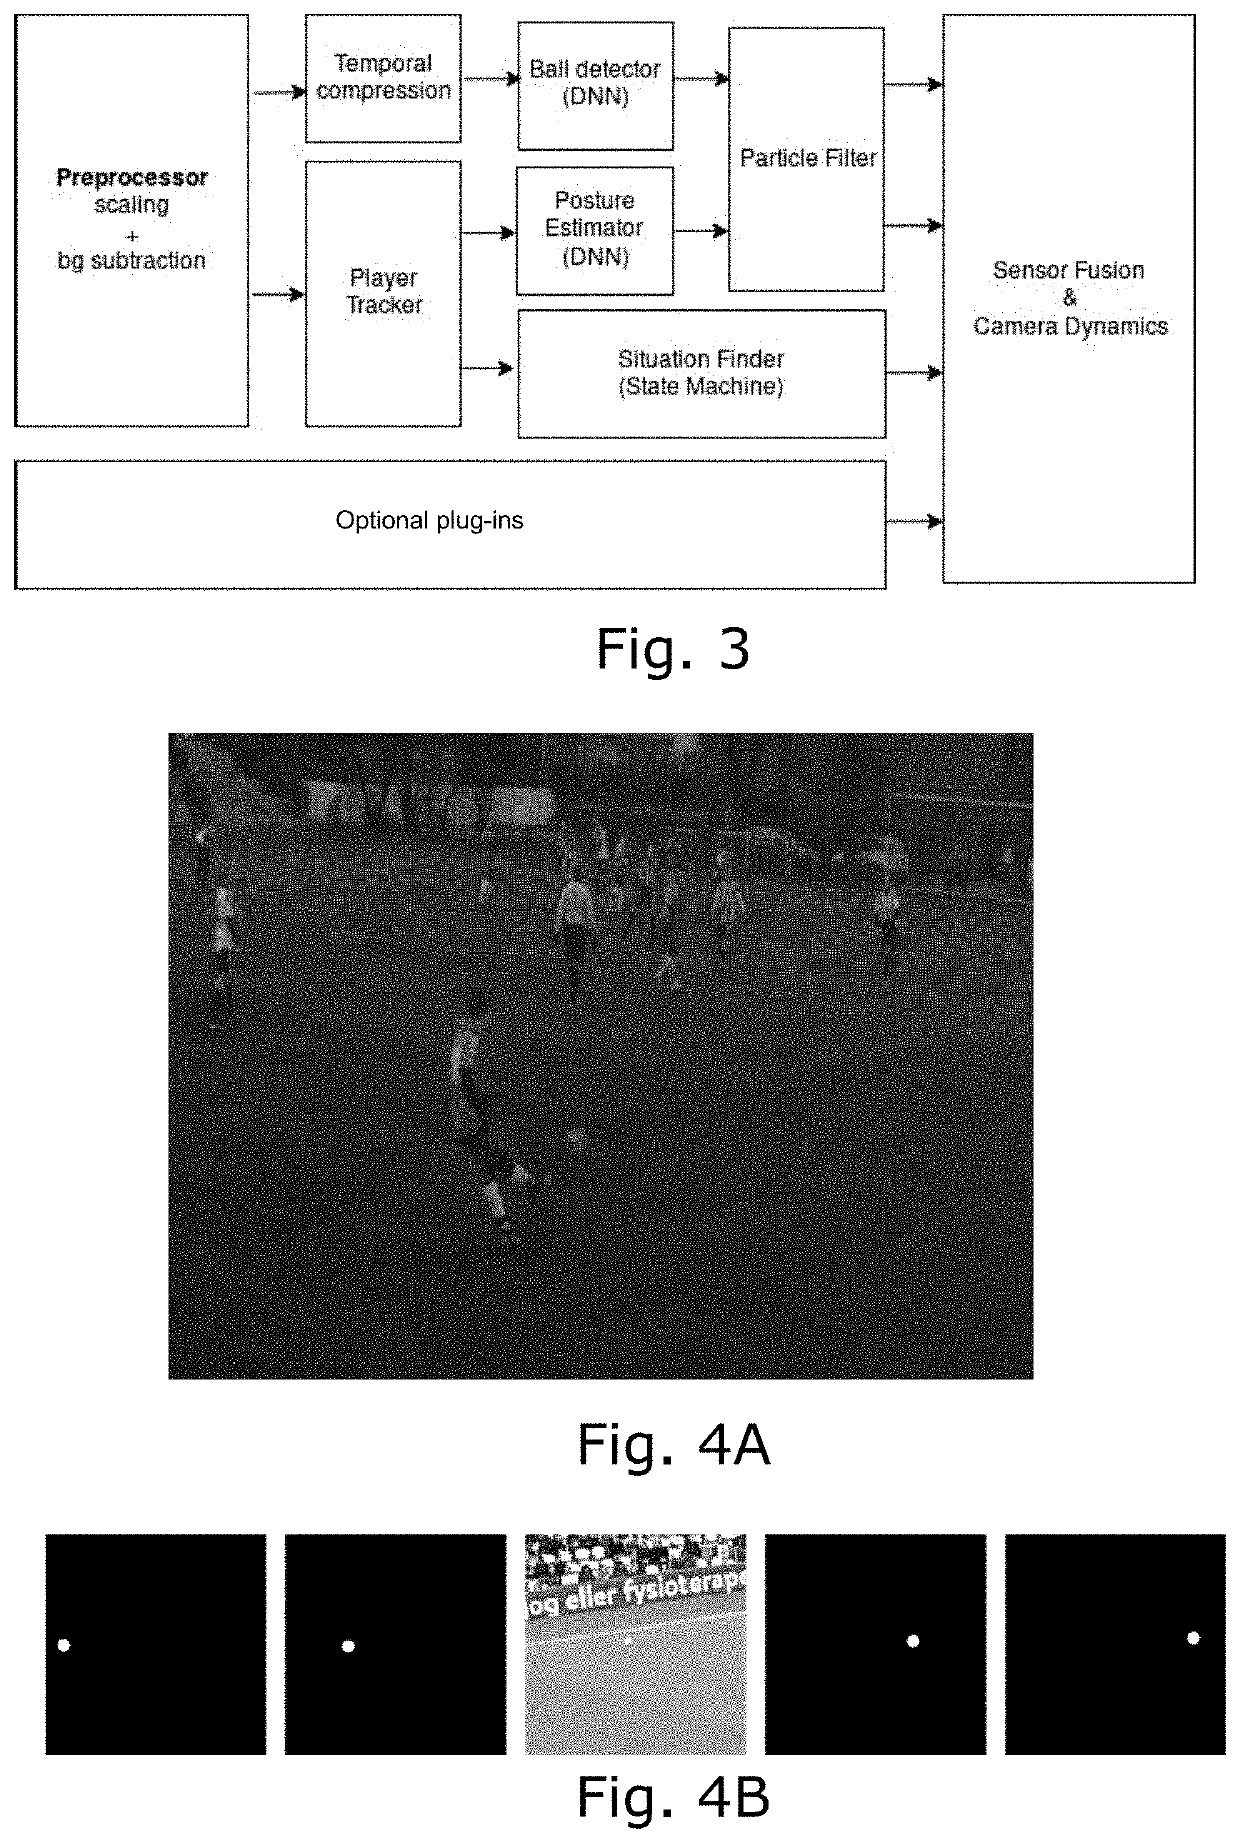 Computer-implemented method for automated detection of a moving area of interest in a video stream of field sports with a common object of interest